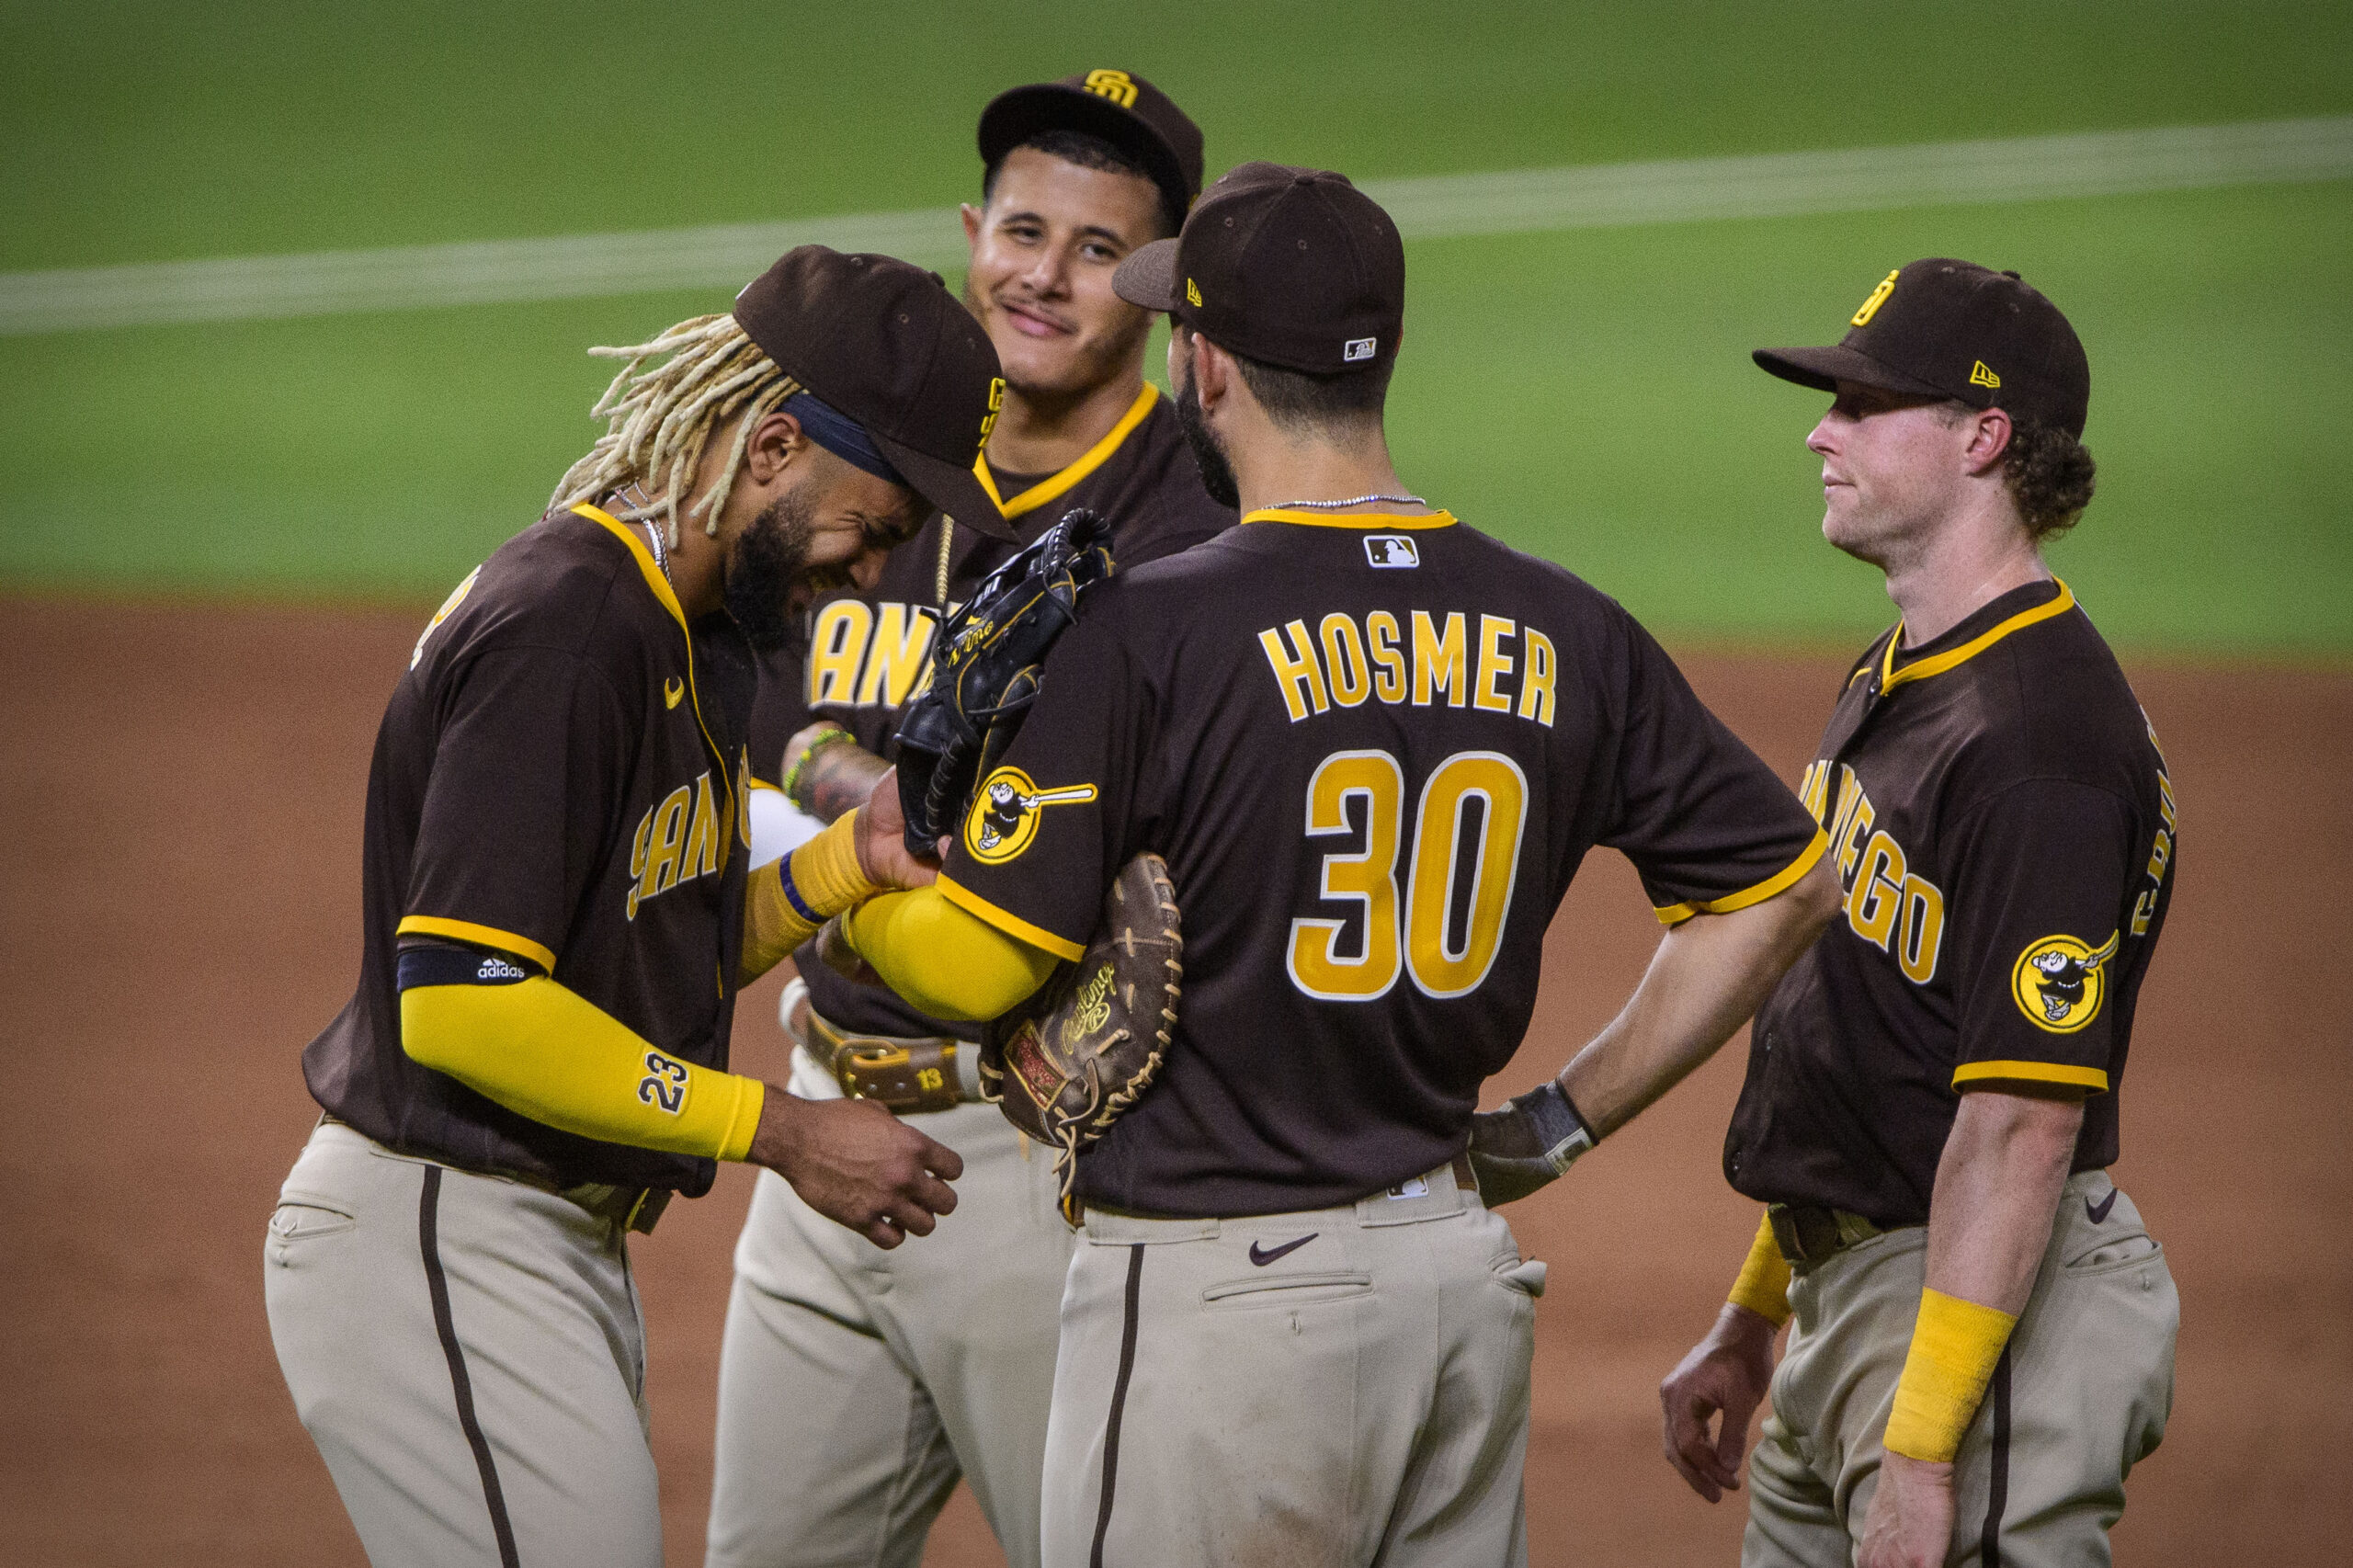 San Diego Padres: New brown jerseys signal the start of winning in